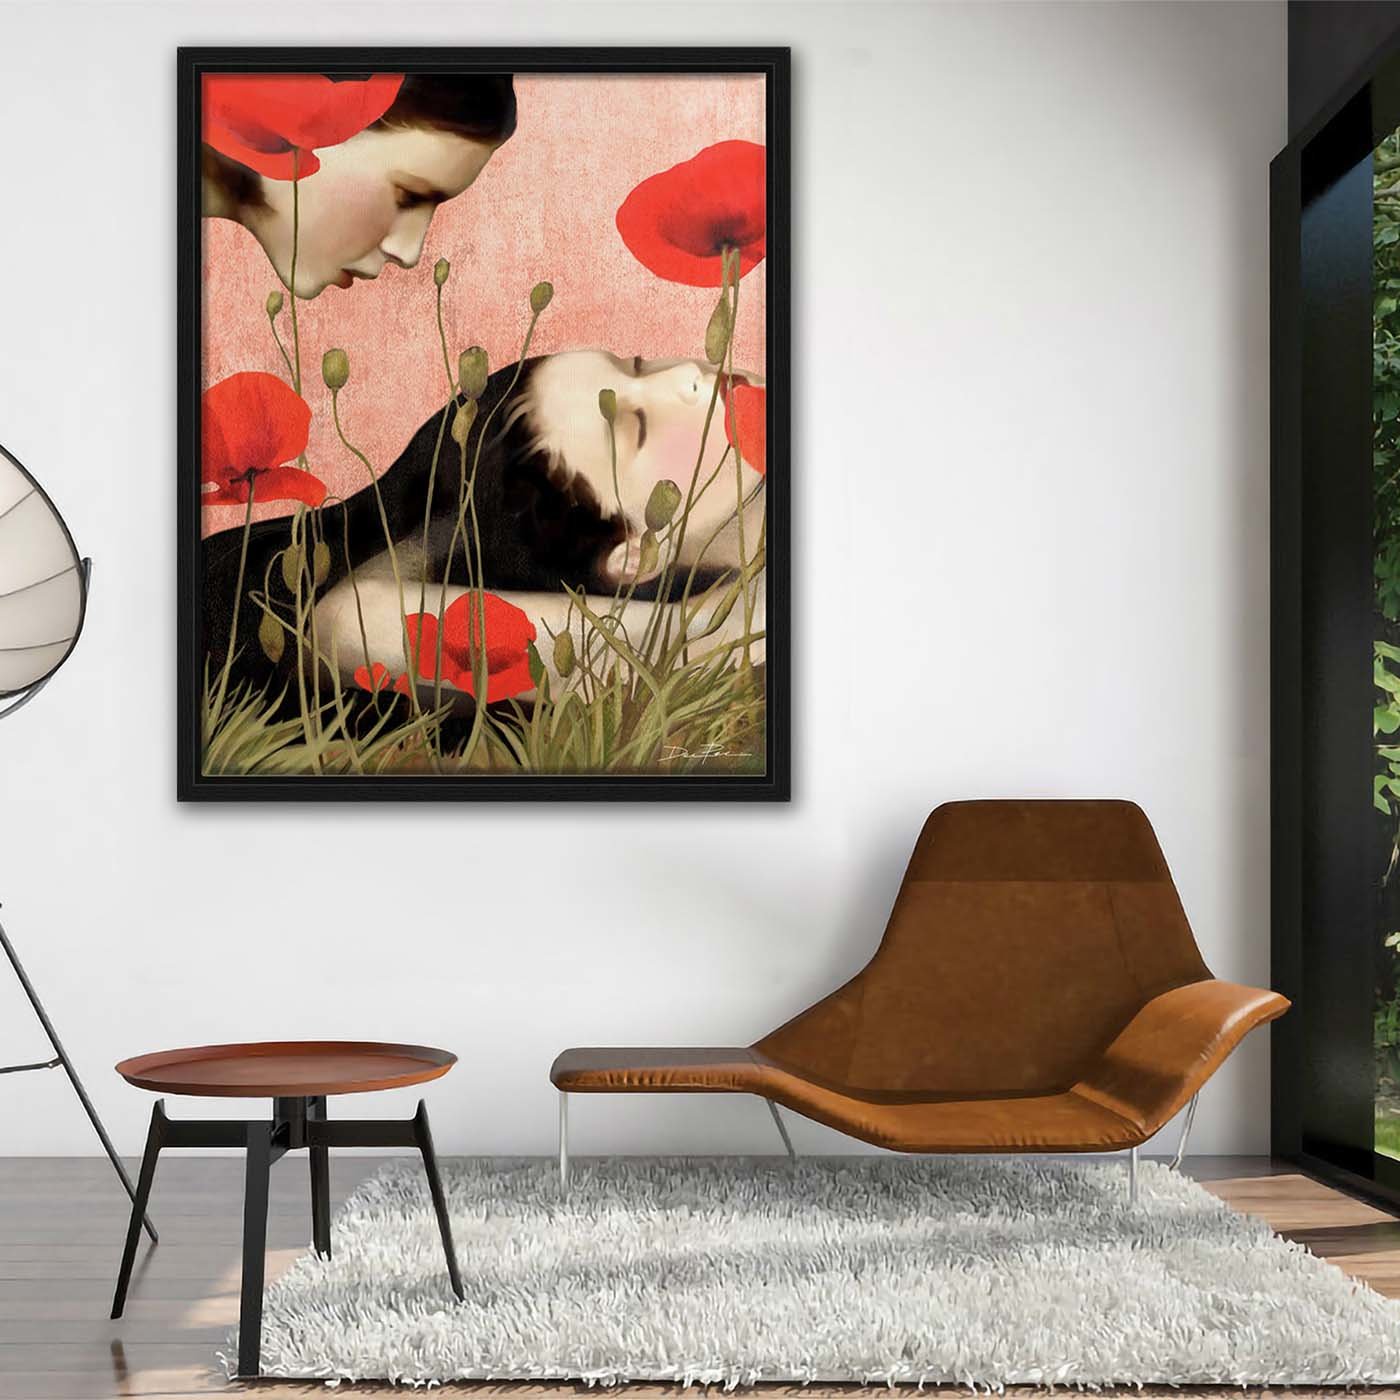 Dreaming in a Field of Poppies Digital Painting - Alternative view 1